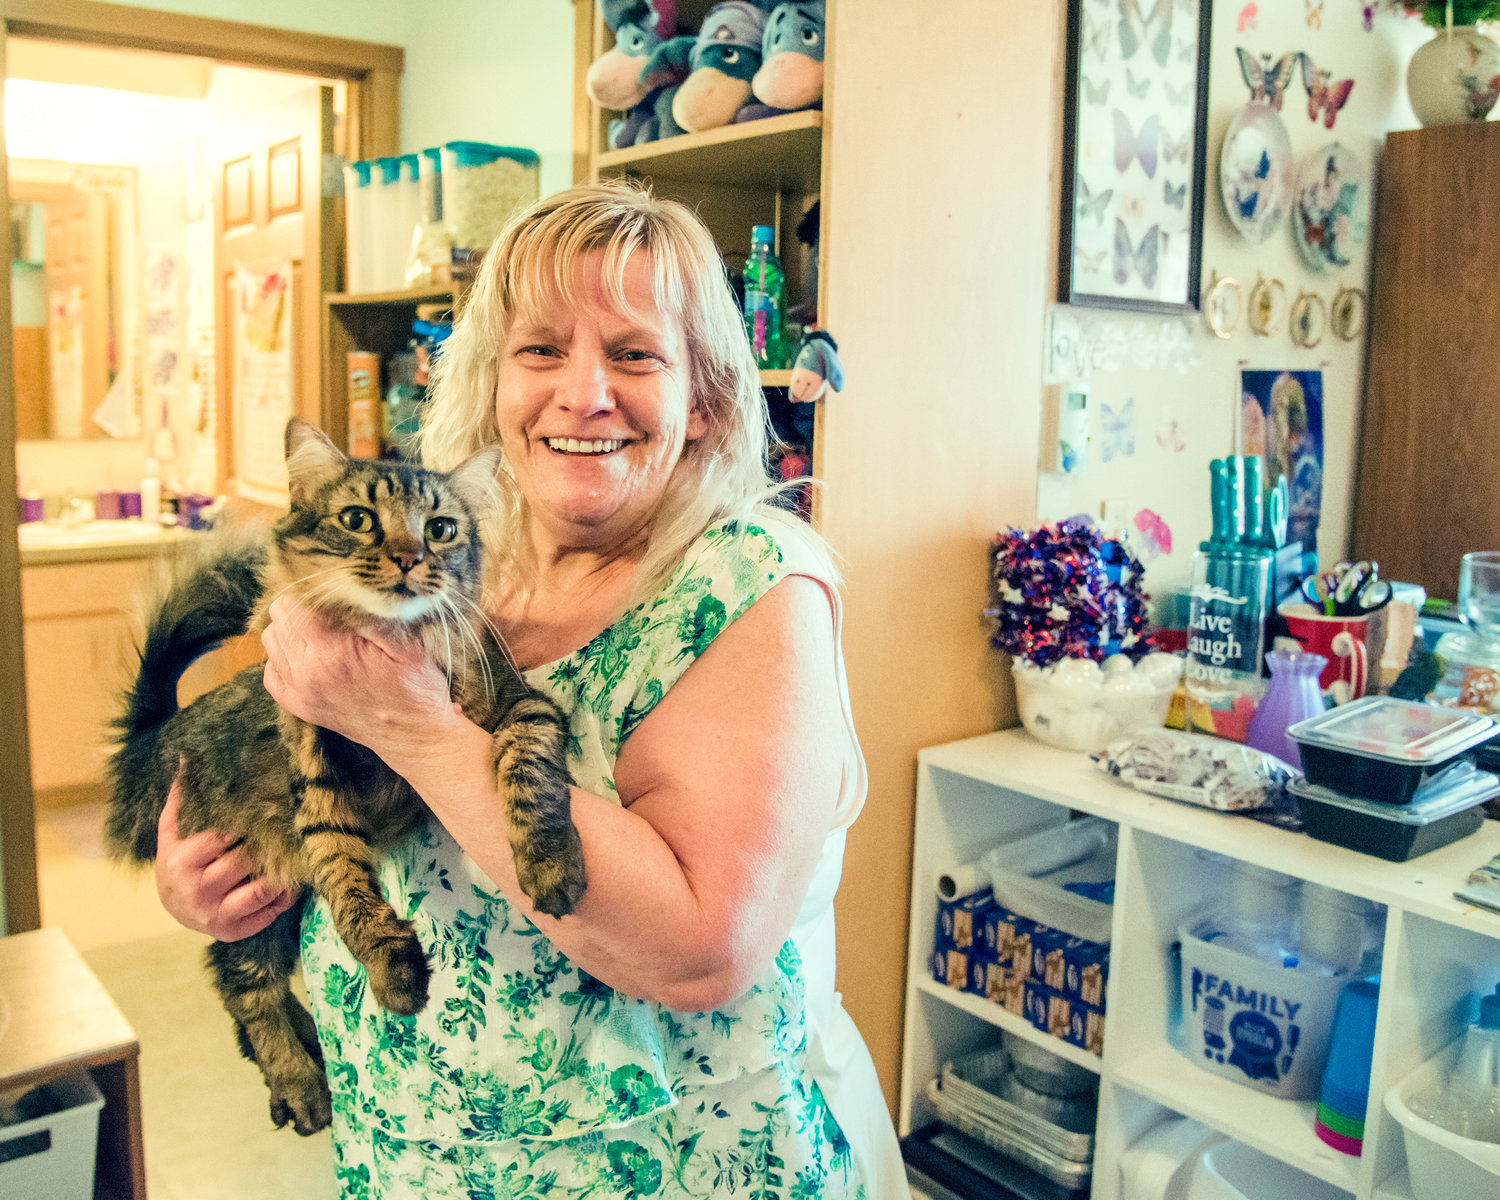 Debbie Nix smiles as she introduces her cat KJ while holding him in her Centralia residence.